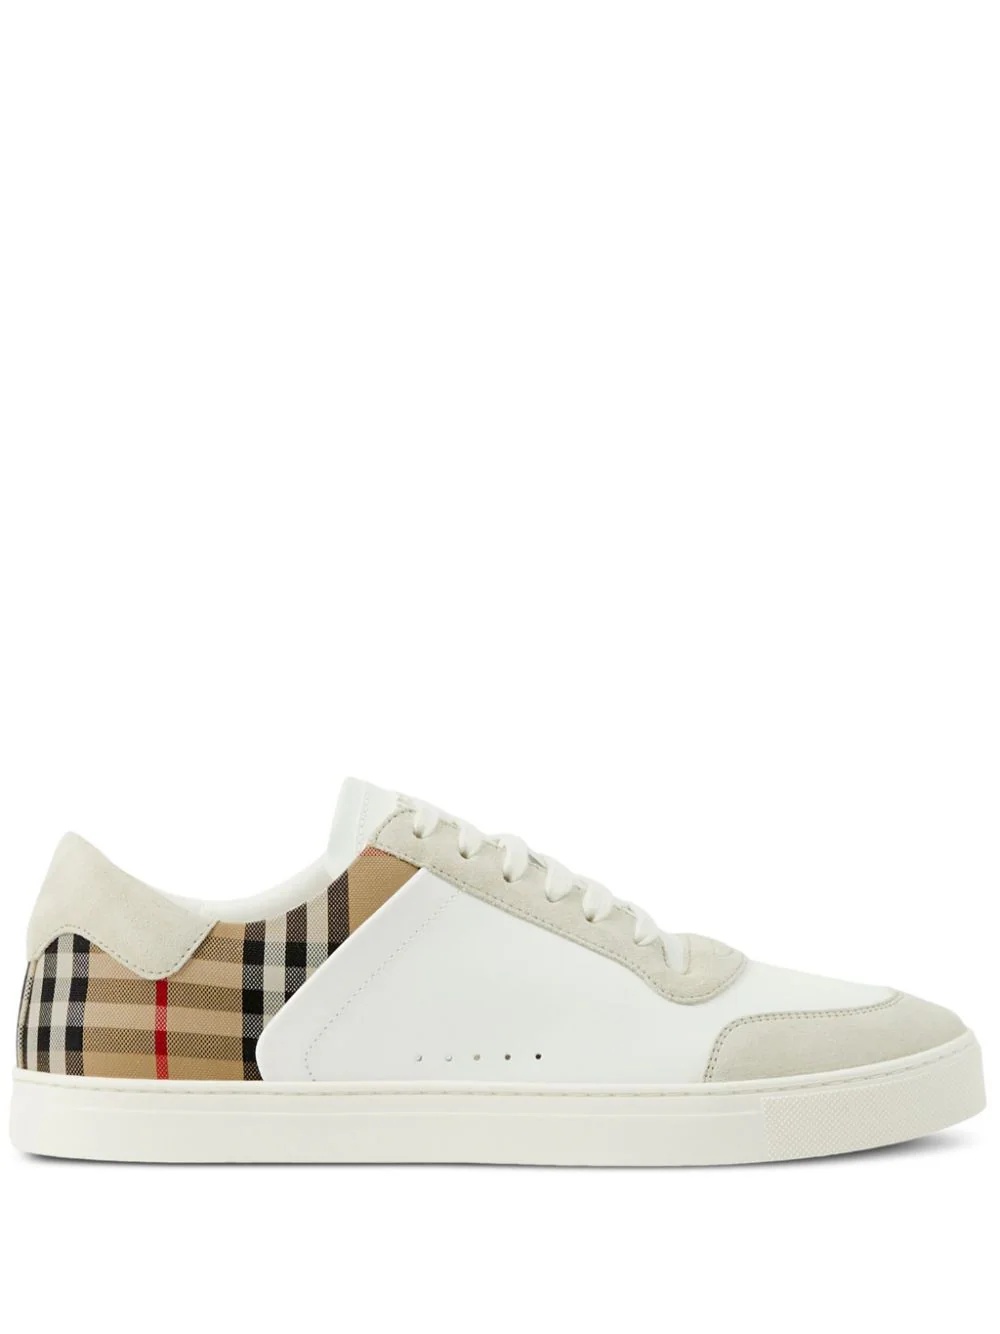 BURBERRY Men Vintage Check Panelled Sneakers - 1